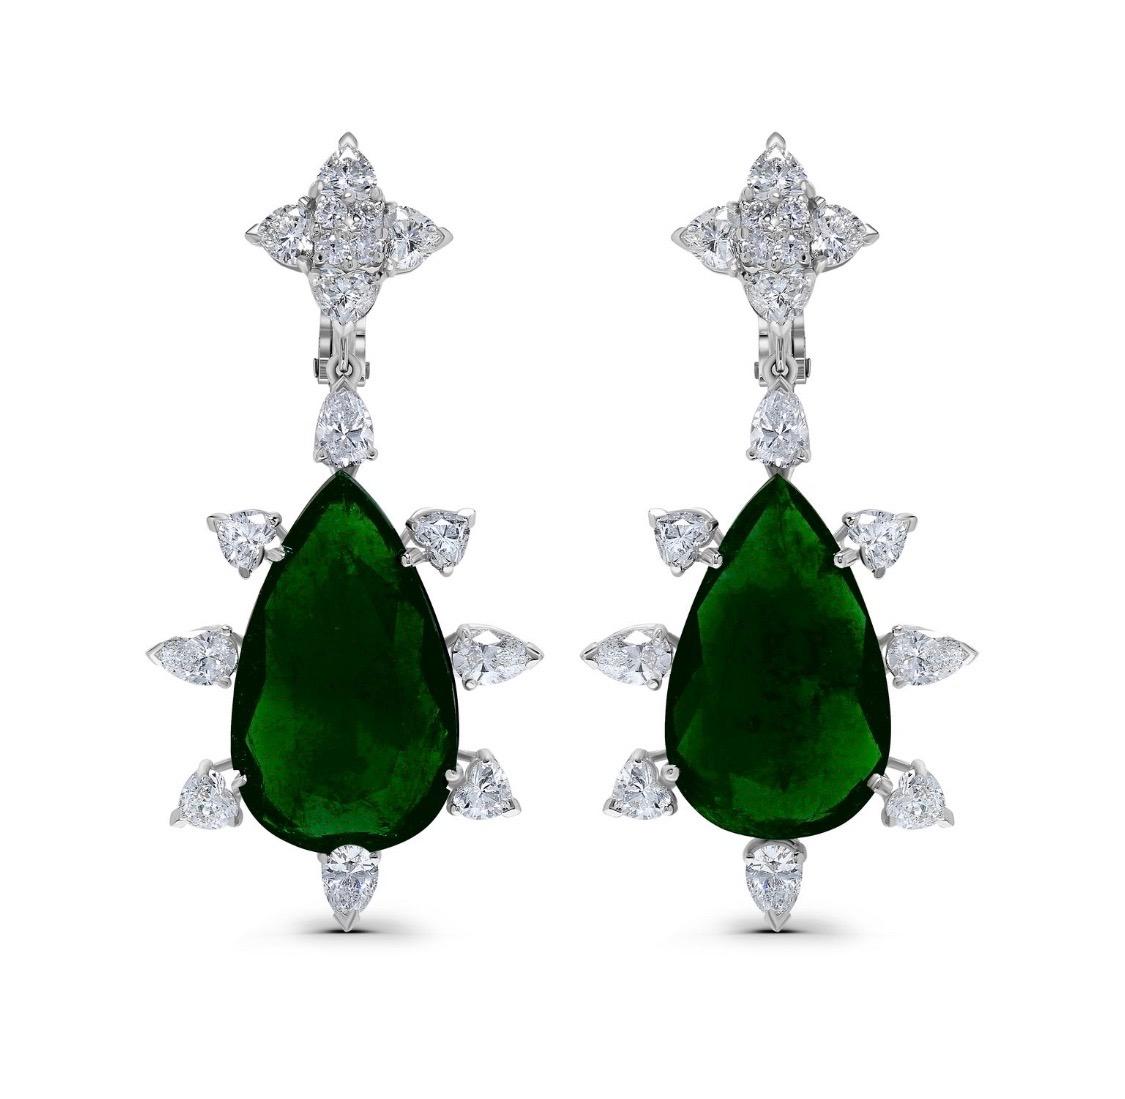 From the Emilio Jewelry Vault, Showcasing two stunning center stone colombian emeralds:
Emeralds: Certified Colombian emeralds 26.60  Carats are vivid green color with excellent crystal and excellent transparency. 
diamonds: 6.50 carats colorless